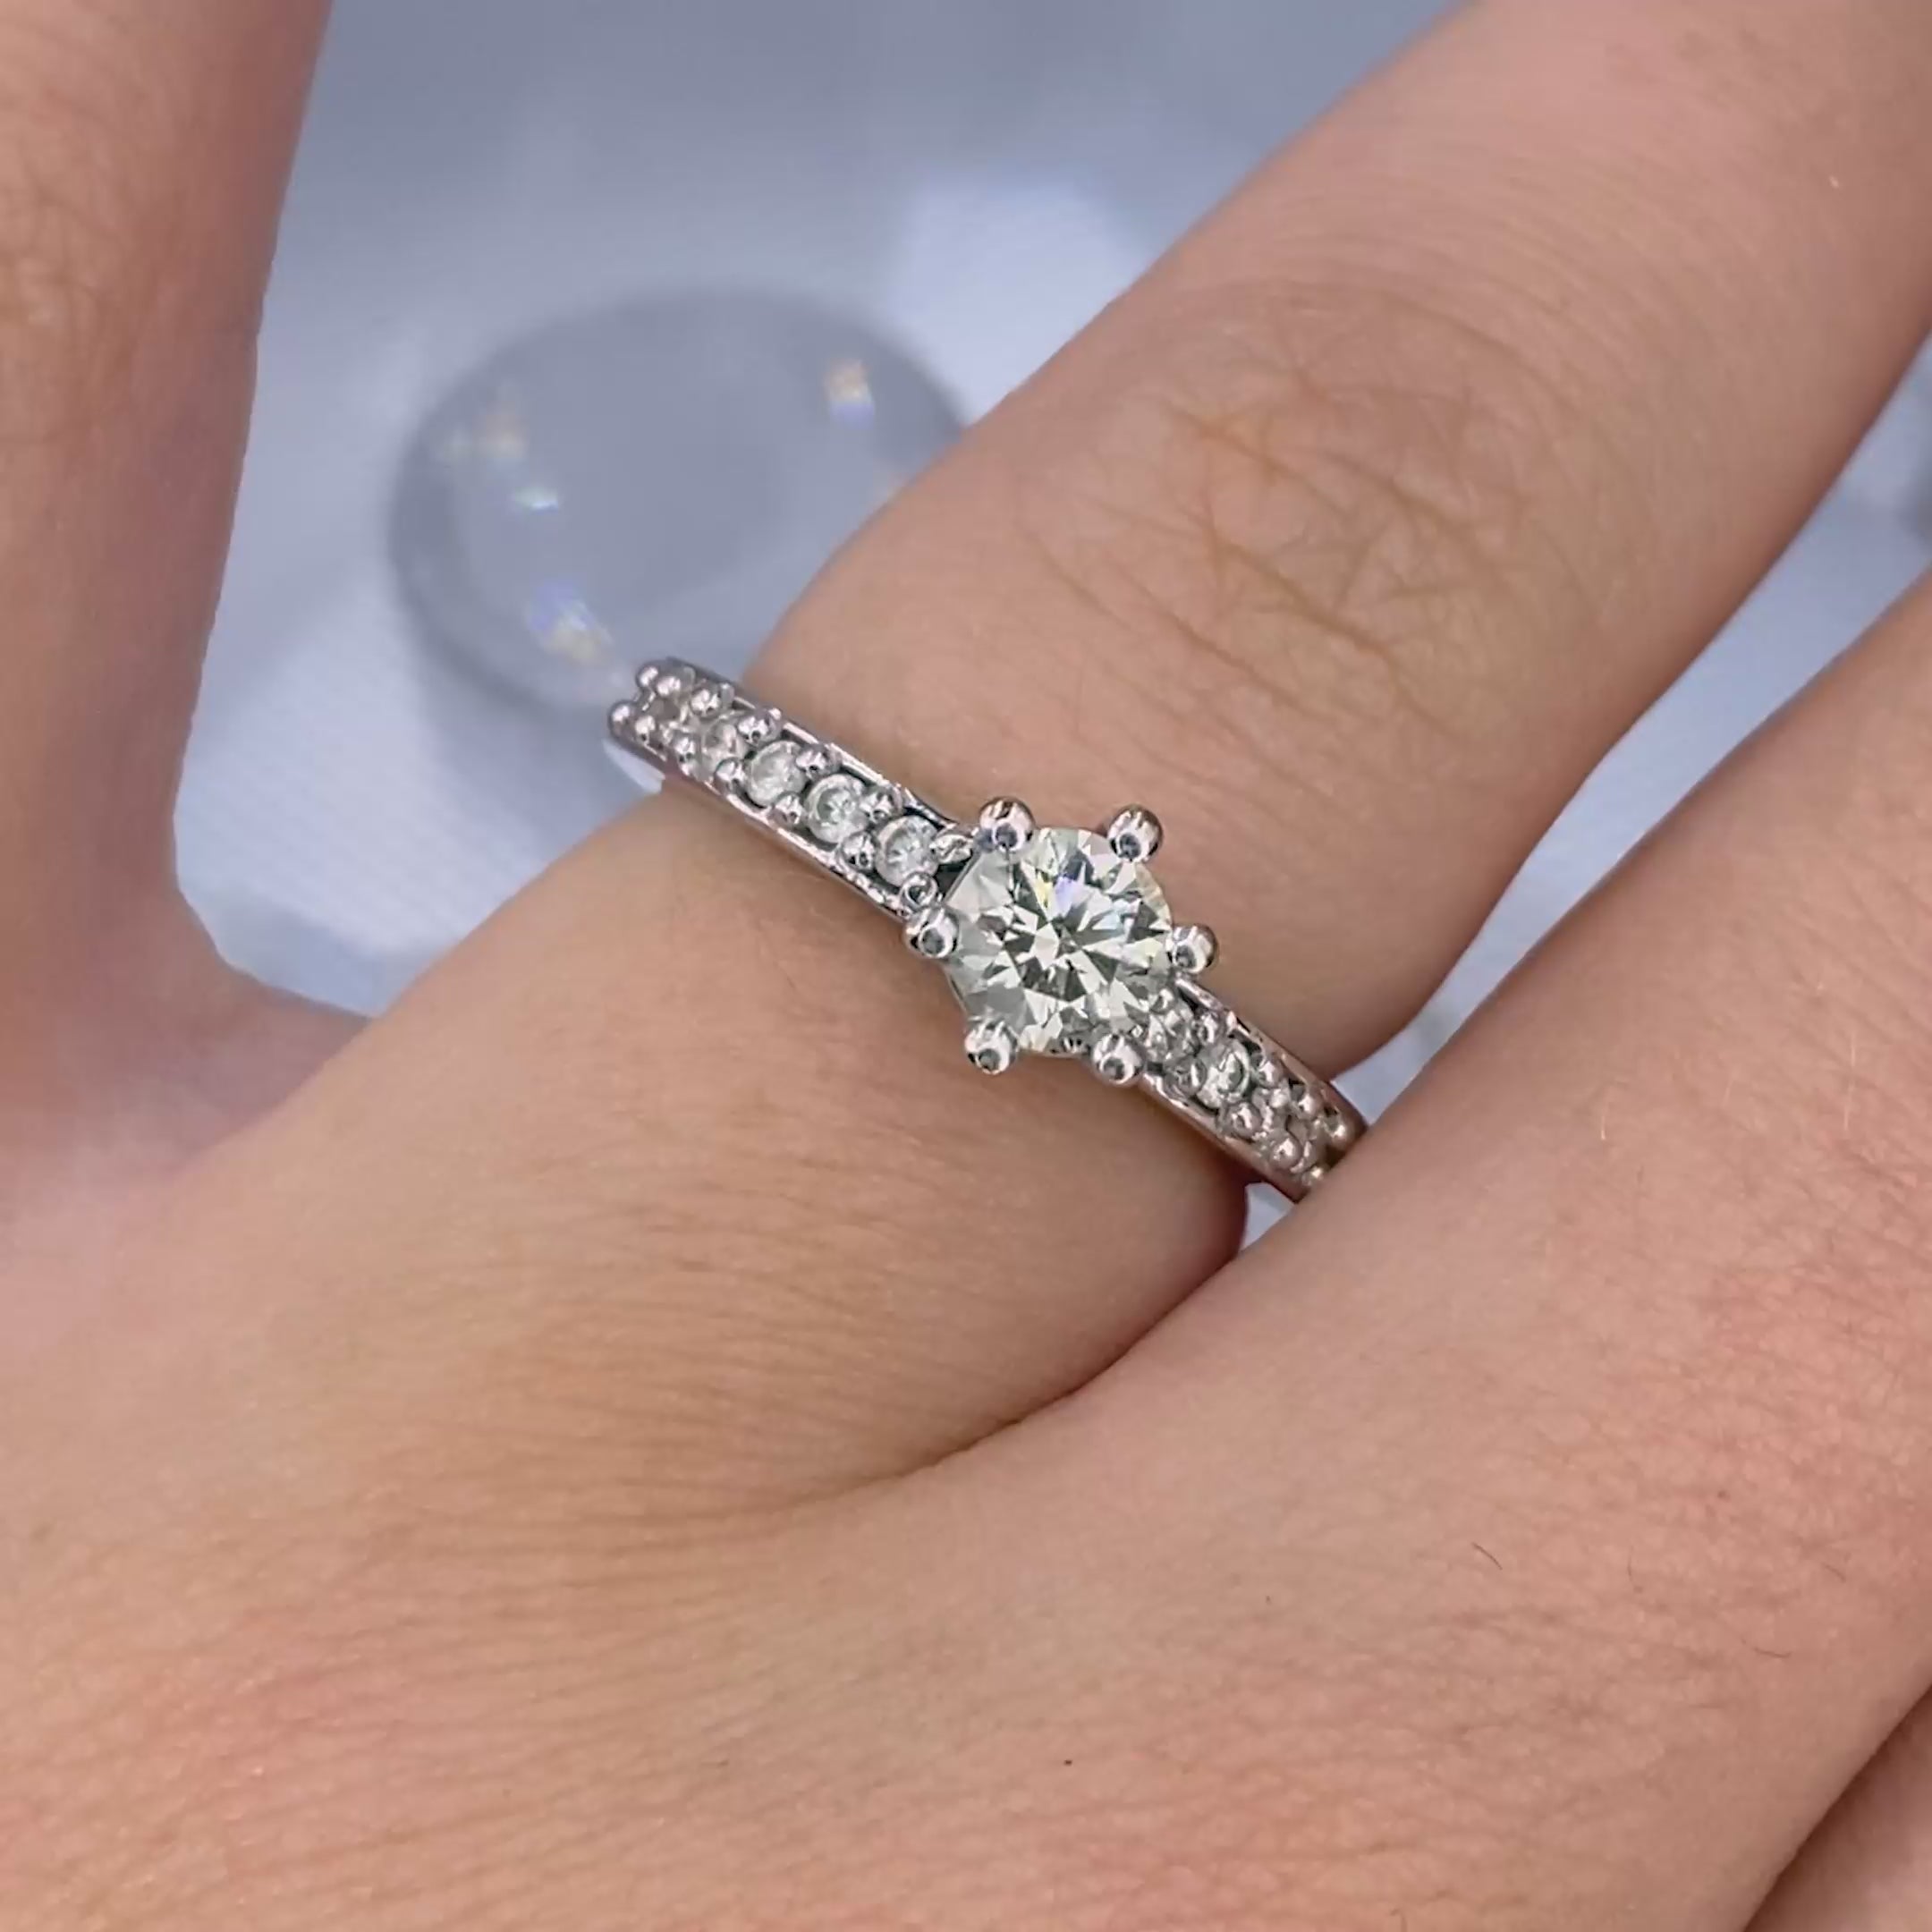 Woman Humiliates Her Fiancé After Finding Out How Much Her Ring Cost |  Wedding ring cost, Small diamond engagement rings, Rings